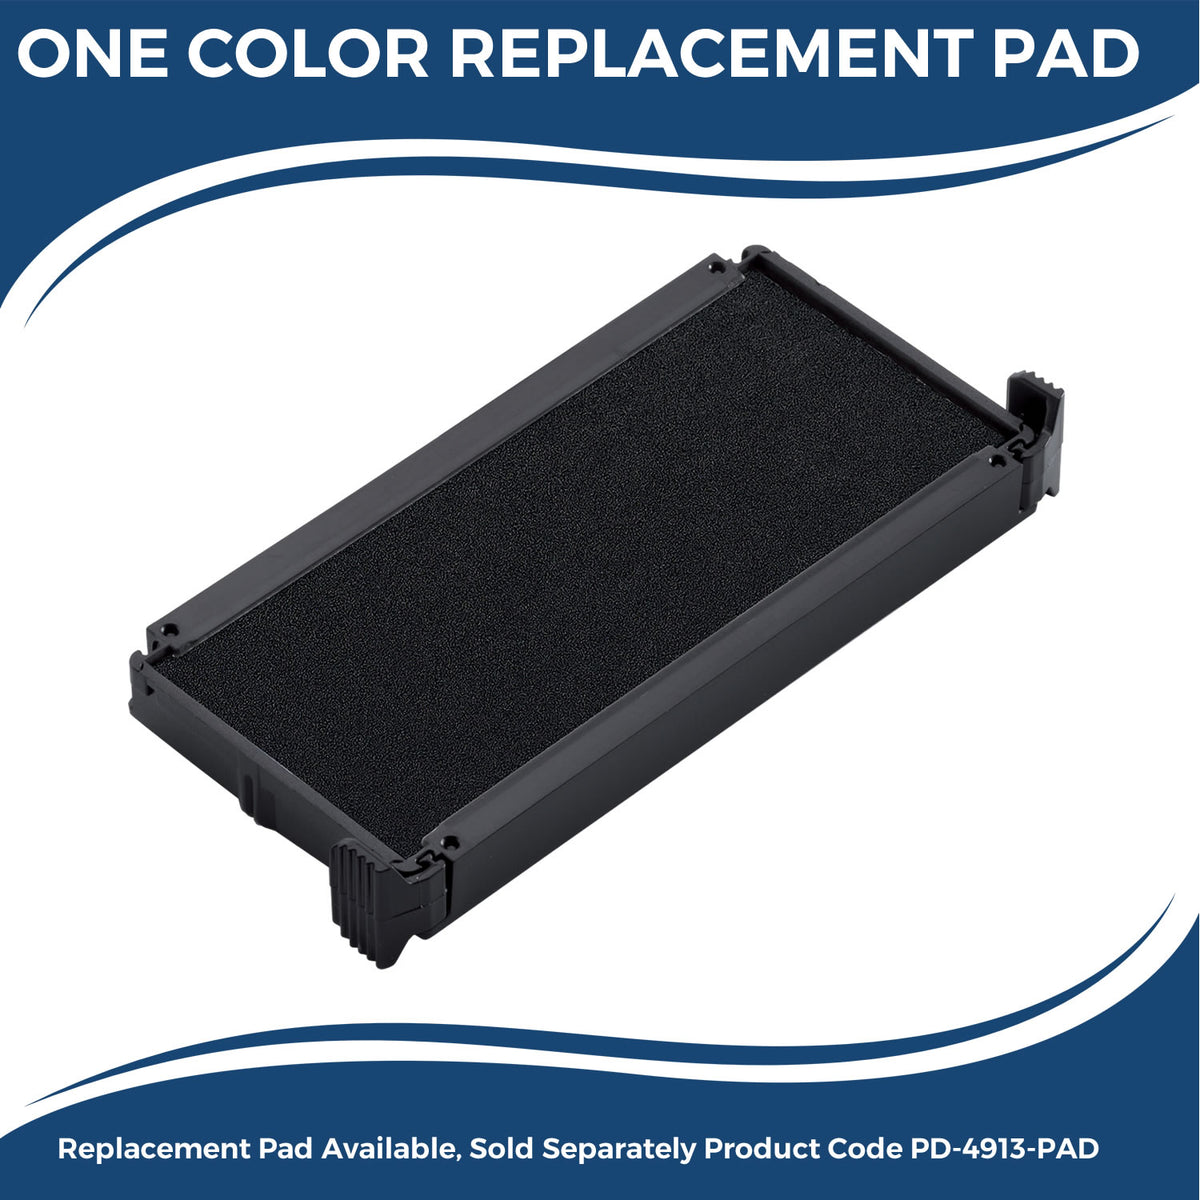 Large Self-Inking Vacant Stamp 5584S Large Replacment Pad